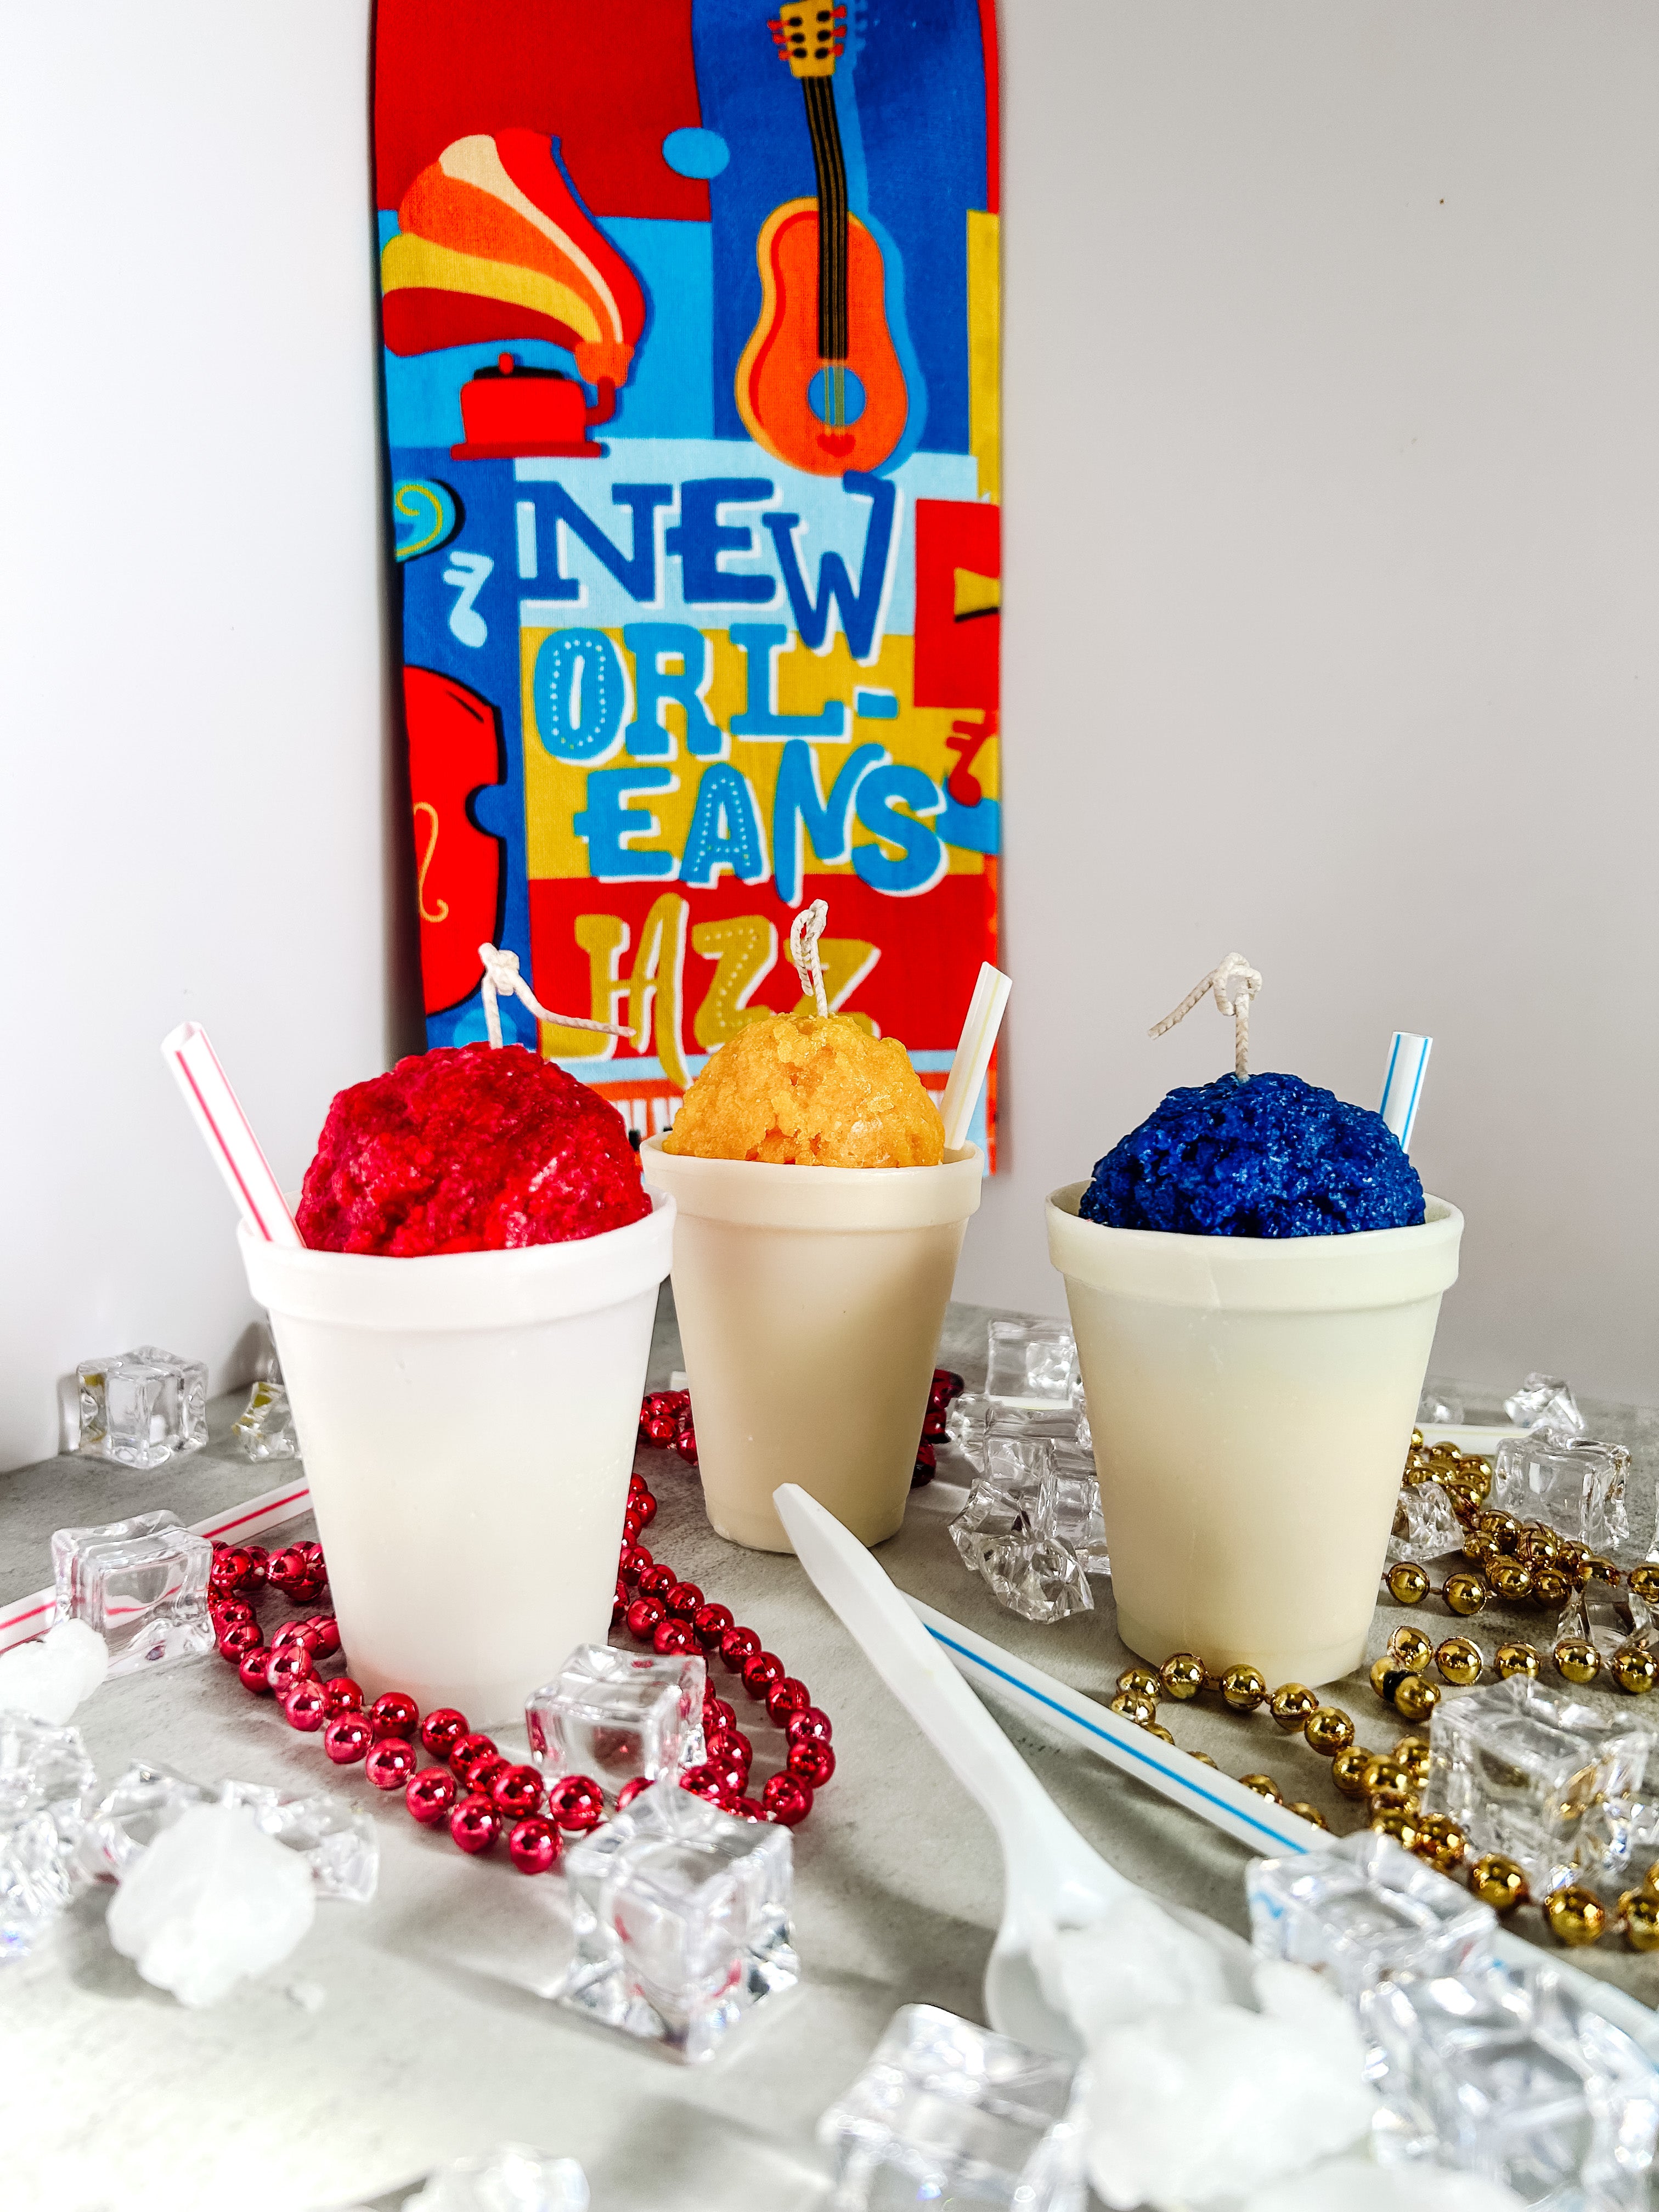 New Orleans Sno-Ball Novelty Candle